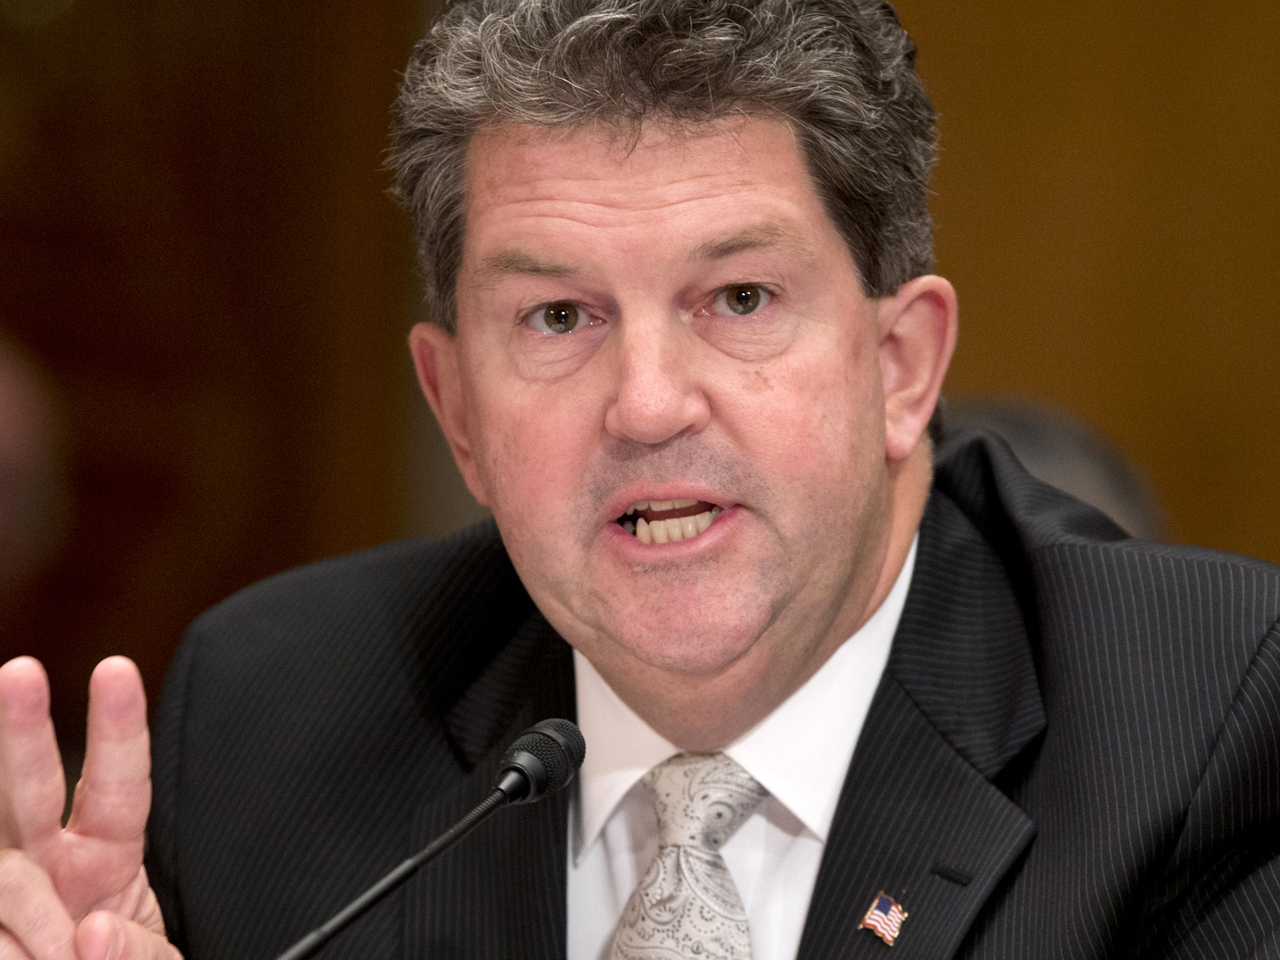 Postmaster General Patrick Donahoe to retire Feb. 1 - CBS News